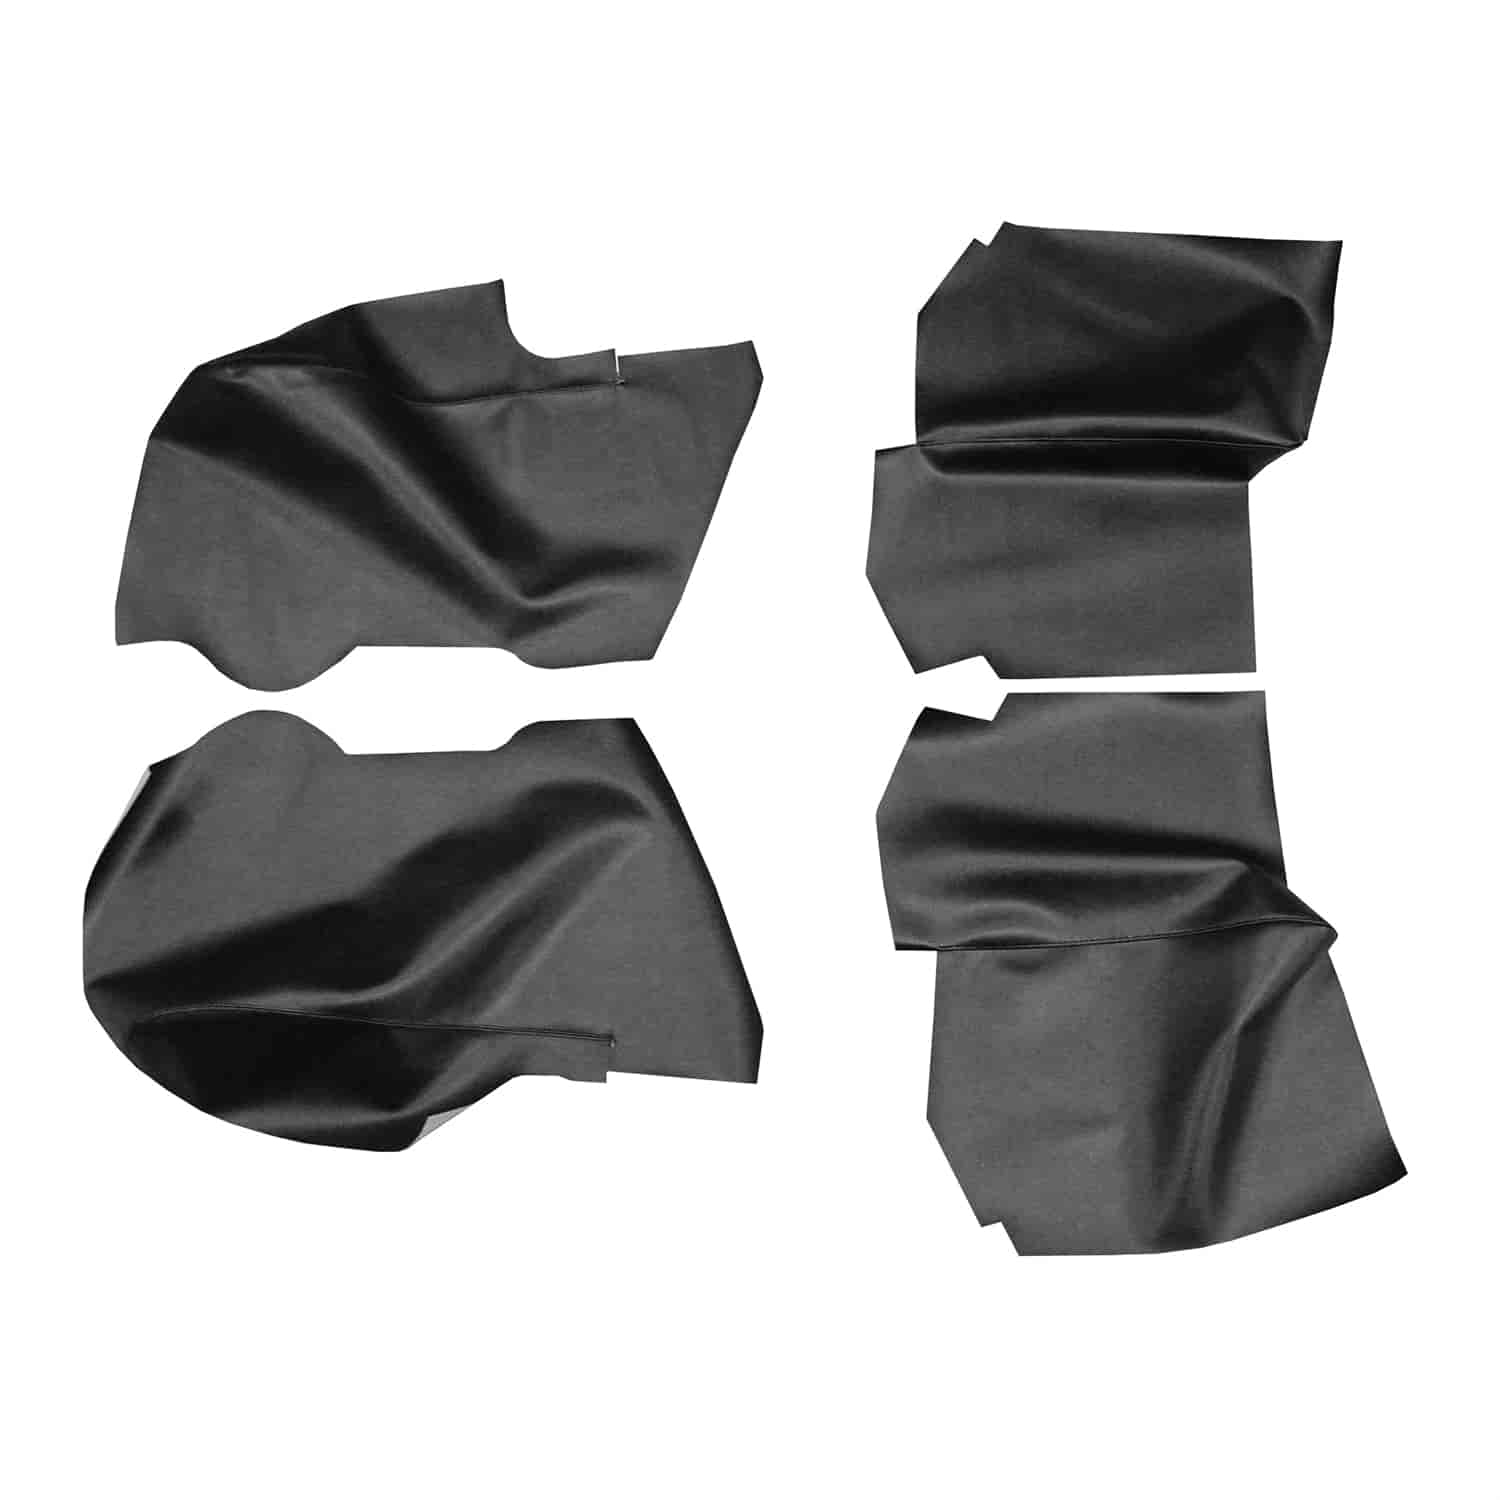 AW65GA00056100G 65 GM A-BODY CONVERTIBLE ARMREST/WELL COVERS - BLACK